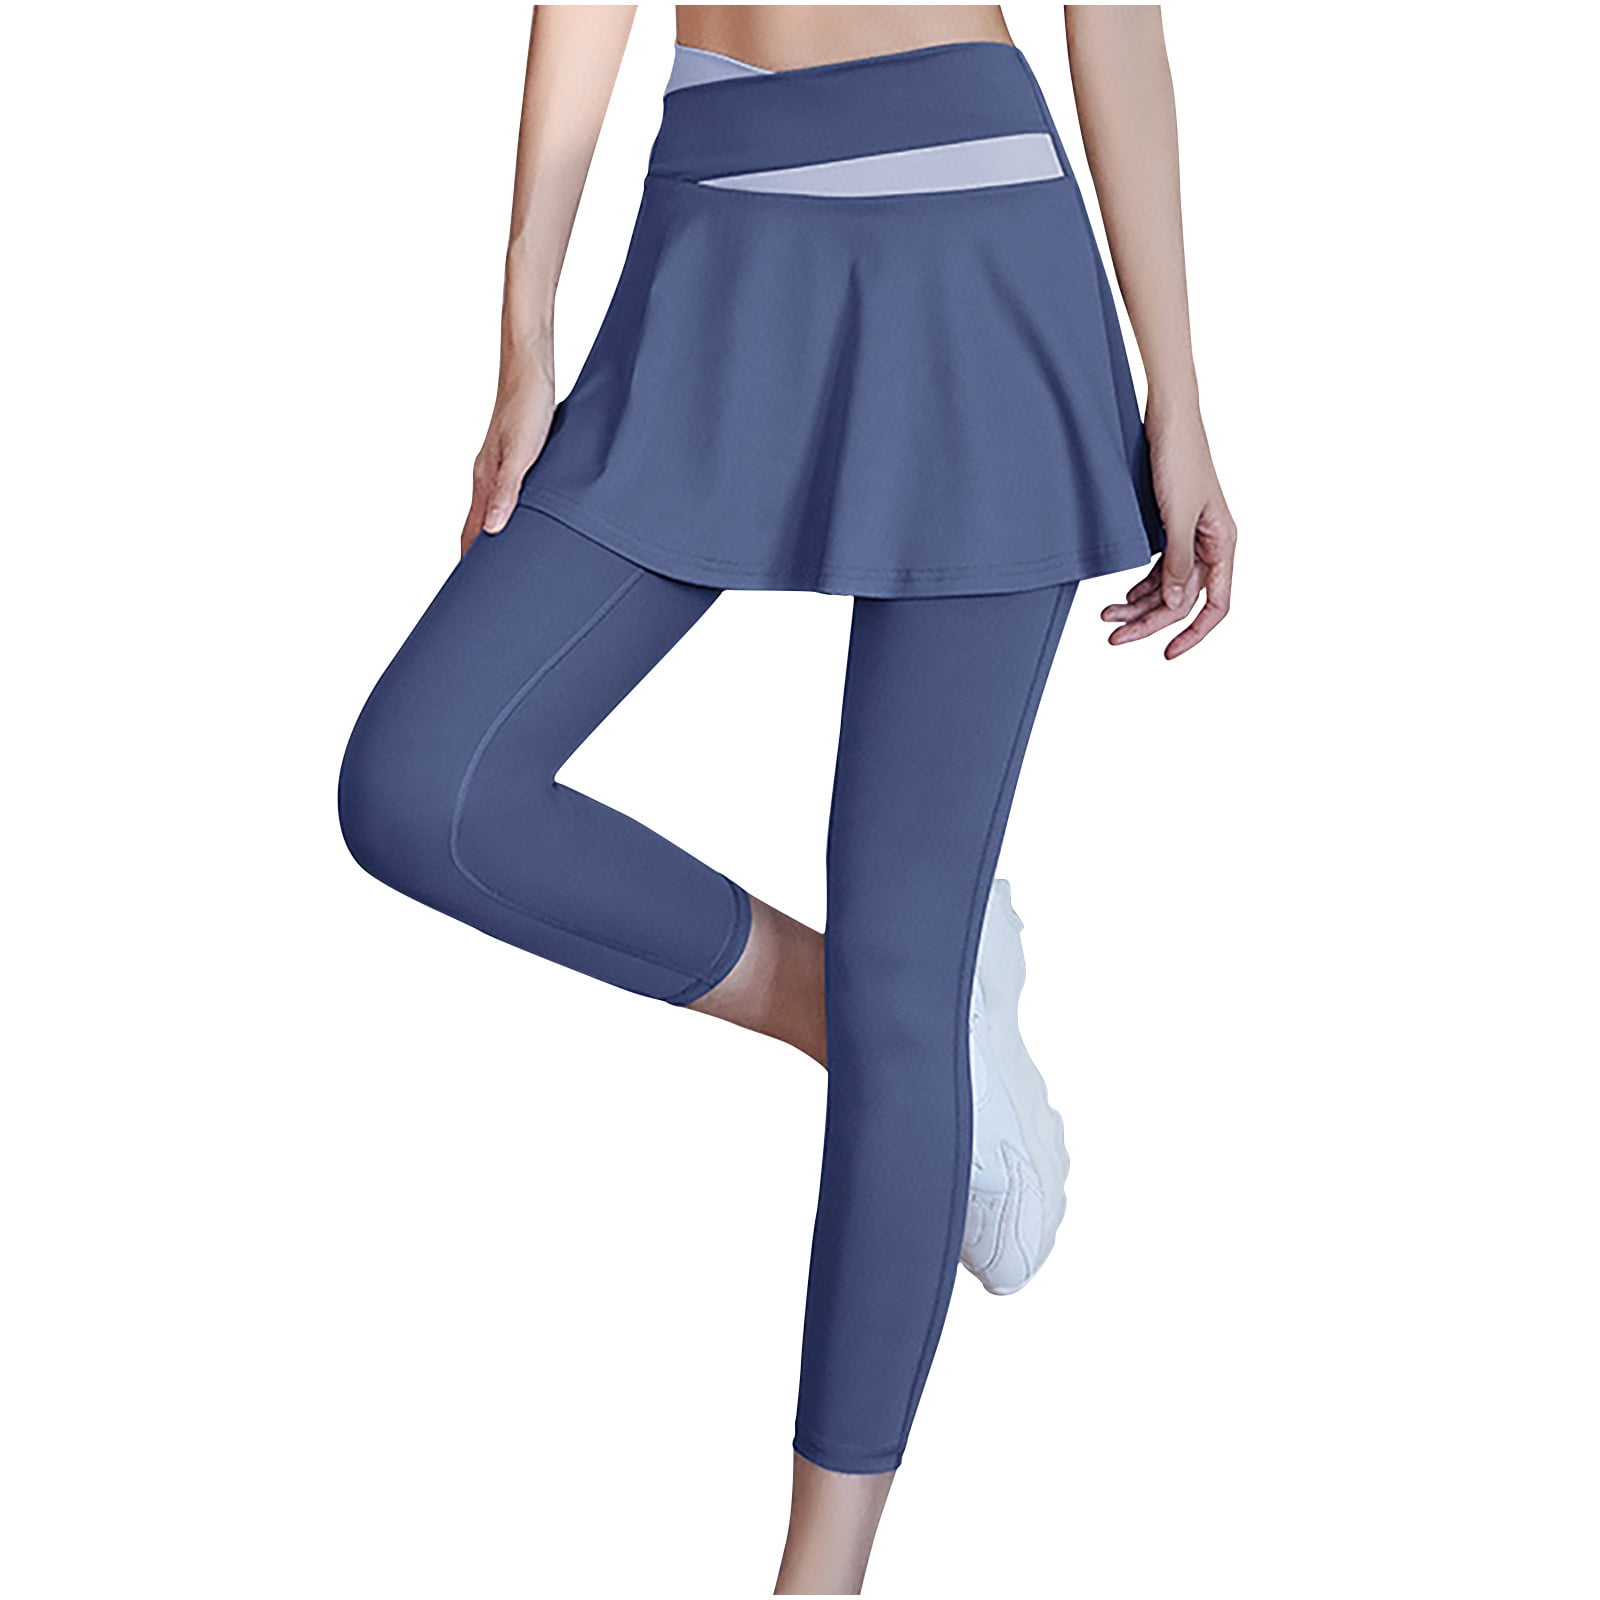 JWZUY Yoga Skirted Leggings with Pockets Women Active Athletic Ruffle  Pleated Golf Tennis Color Block Skirt Pants Blue XL 